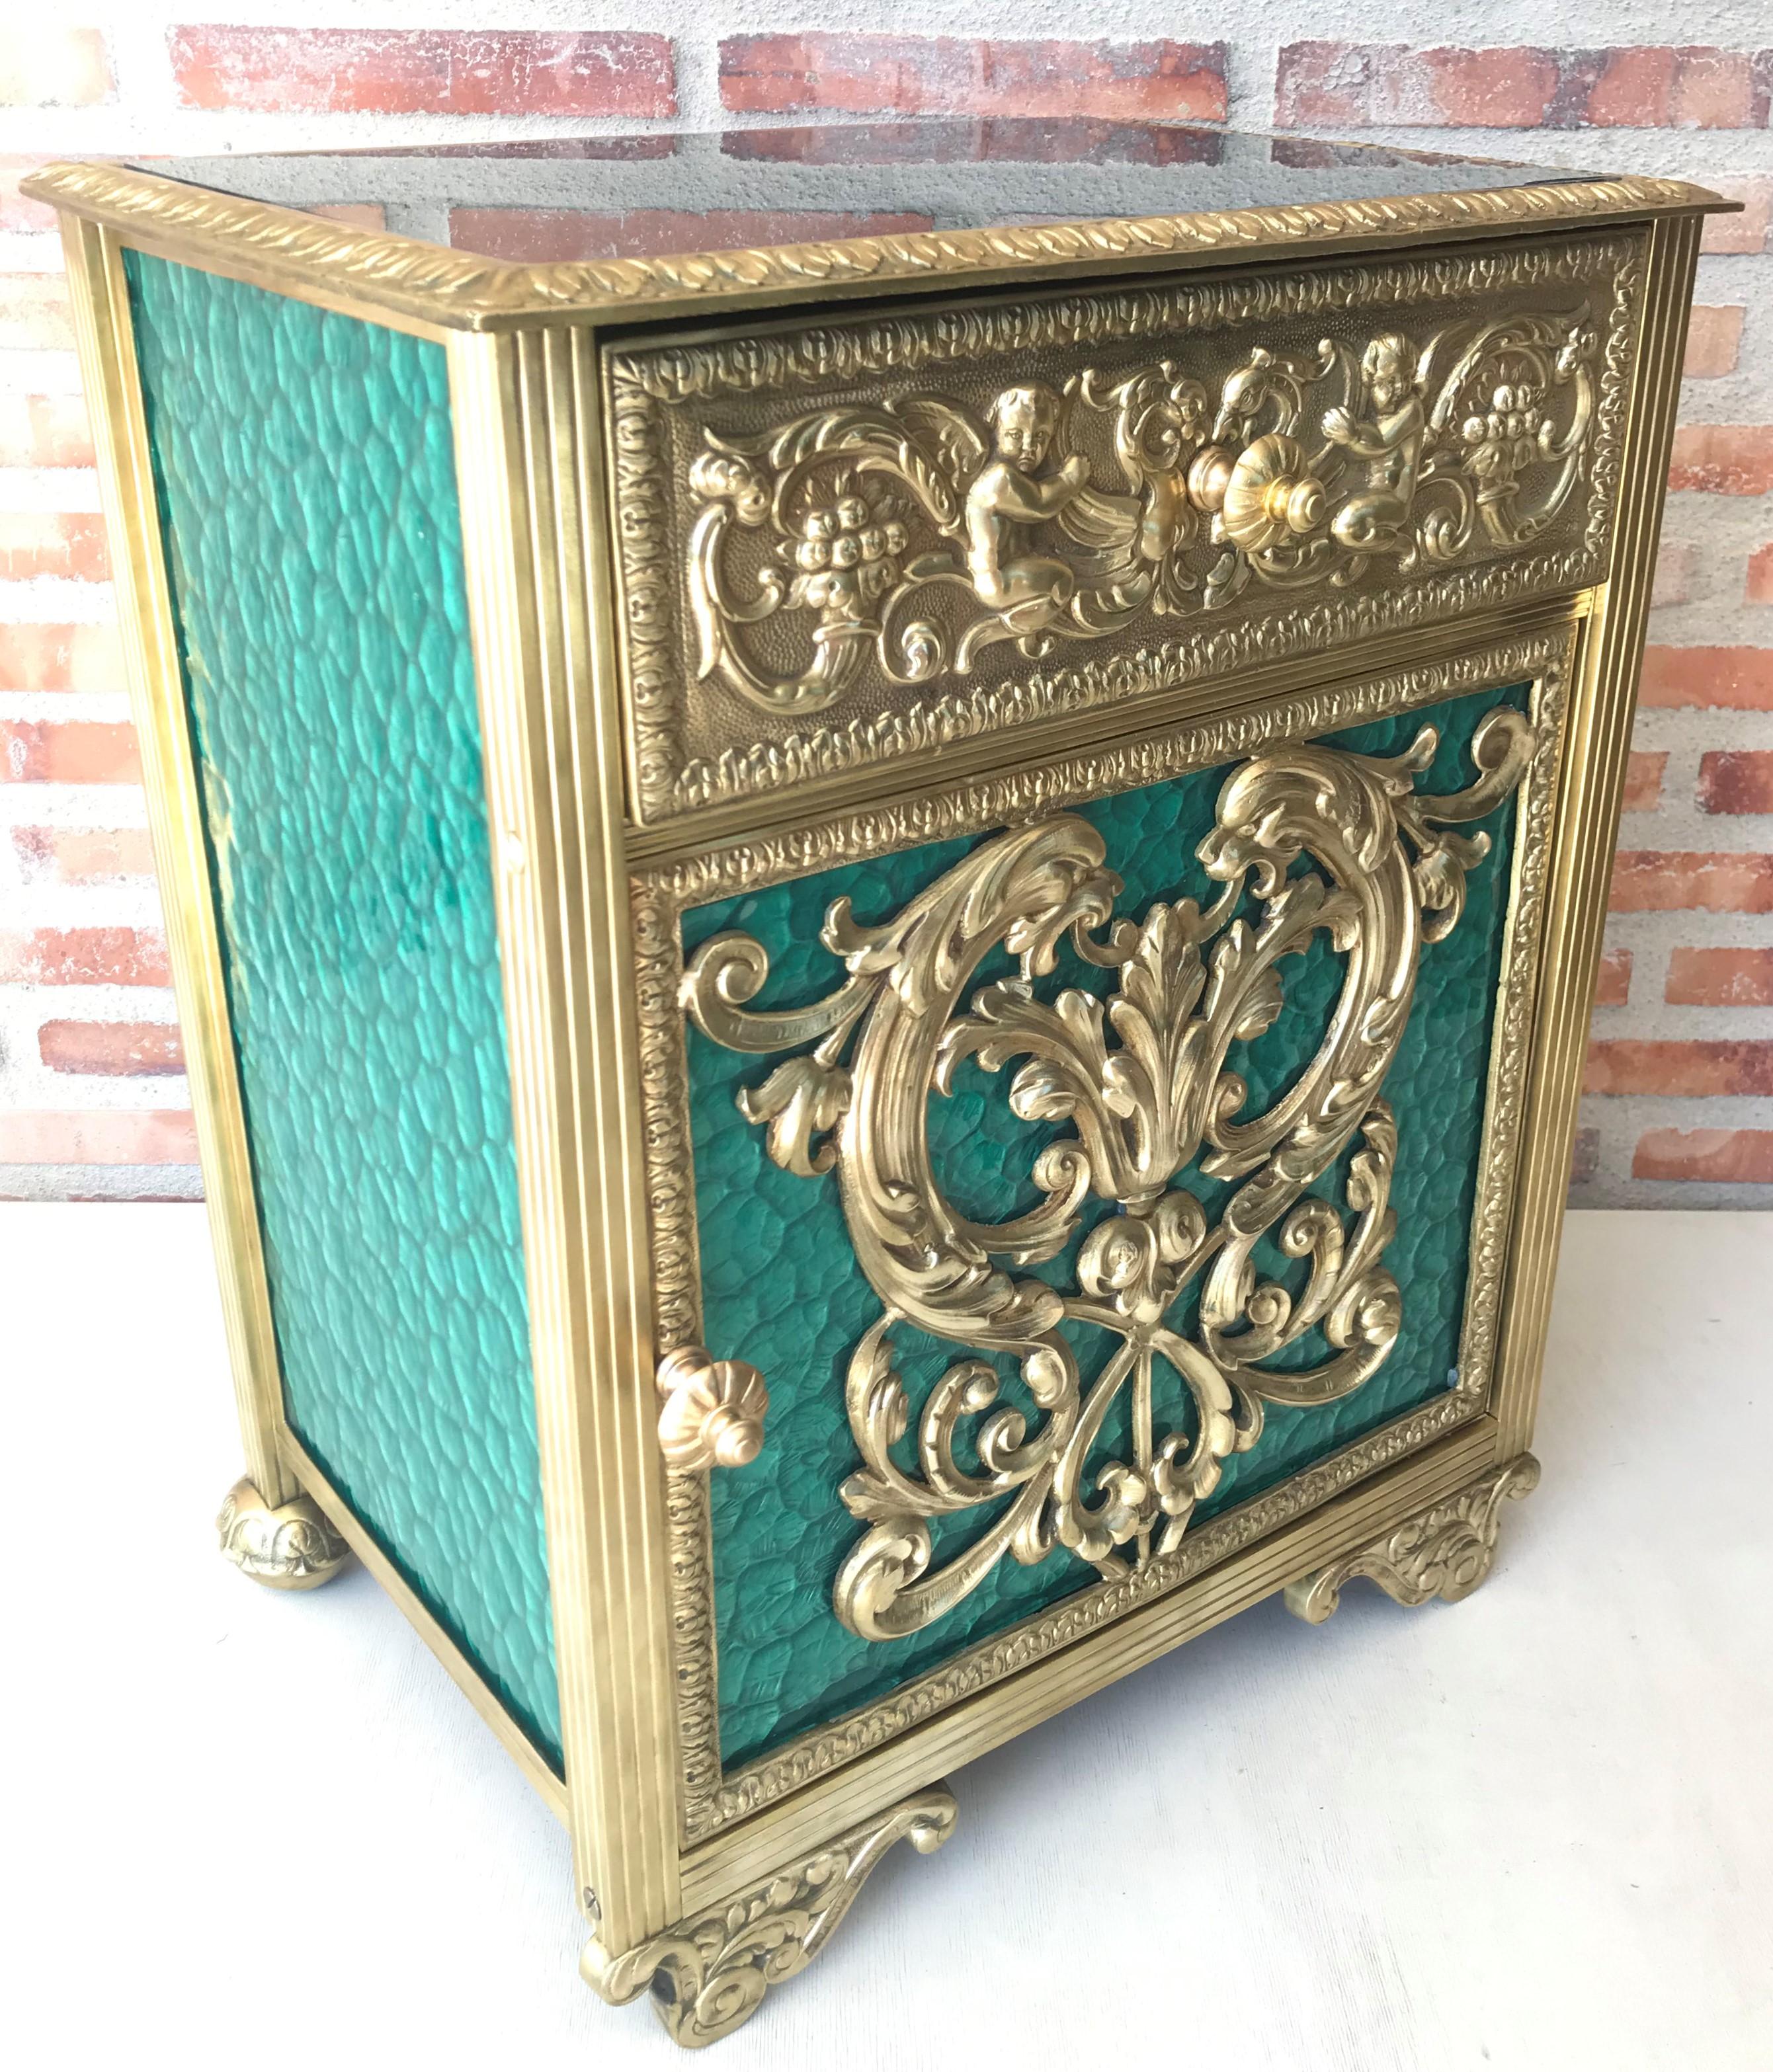 20th century pair of bronze nightstands with green glass doors and drawers.

This early antique Louis XVI style bronze or glass vitrine cabinet or nightstand is simply stunning and constructed of the finest quality. The bronze mounts of fine form